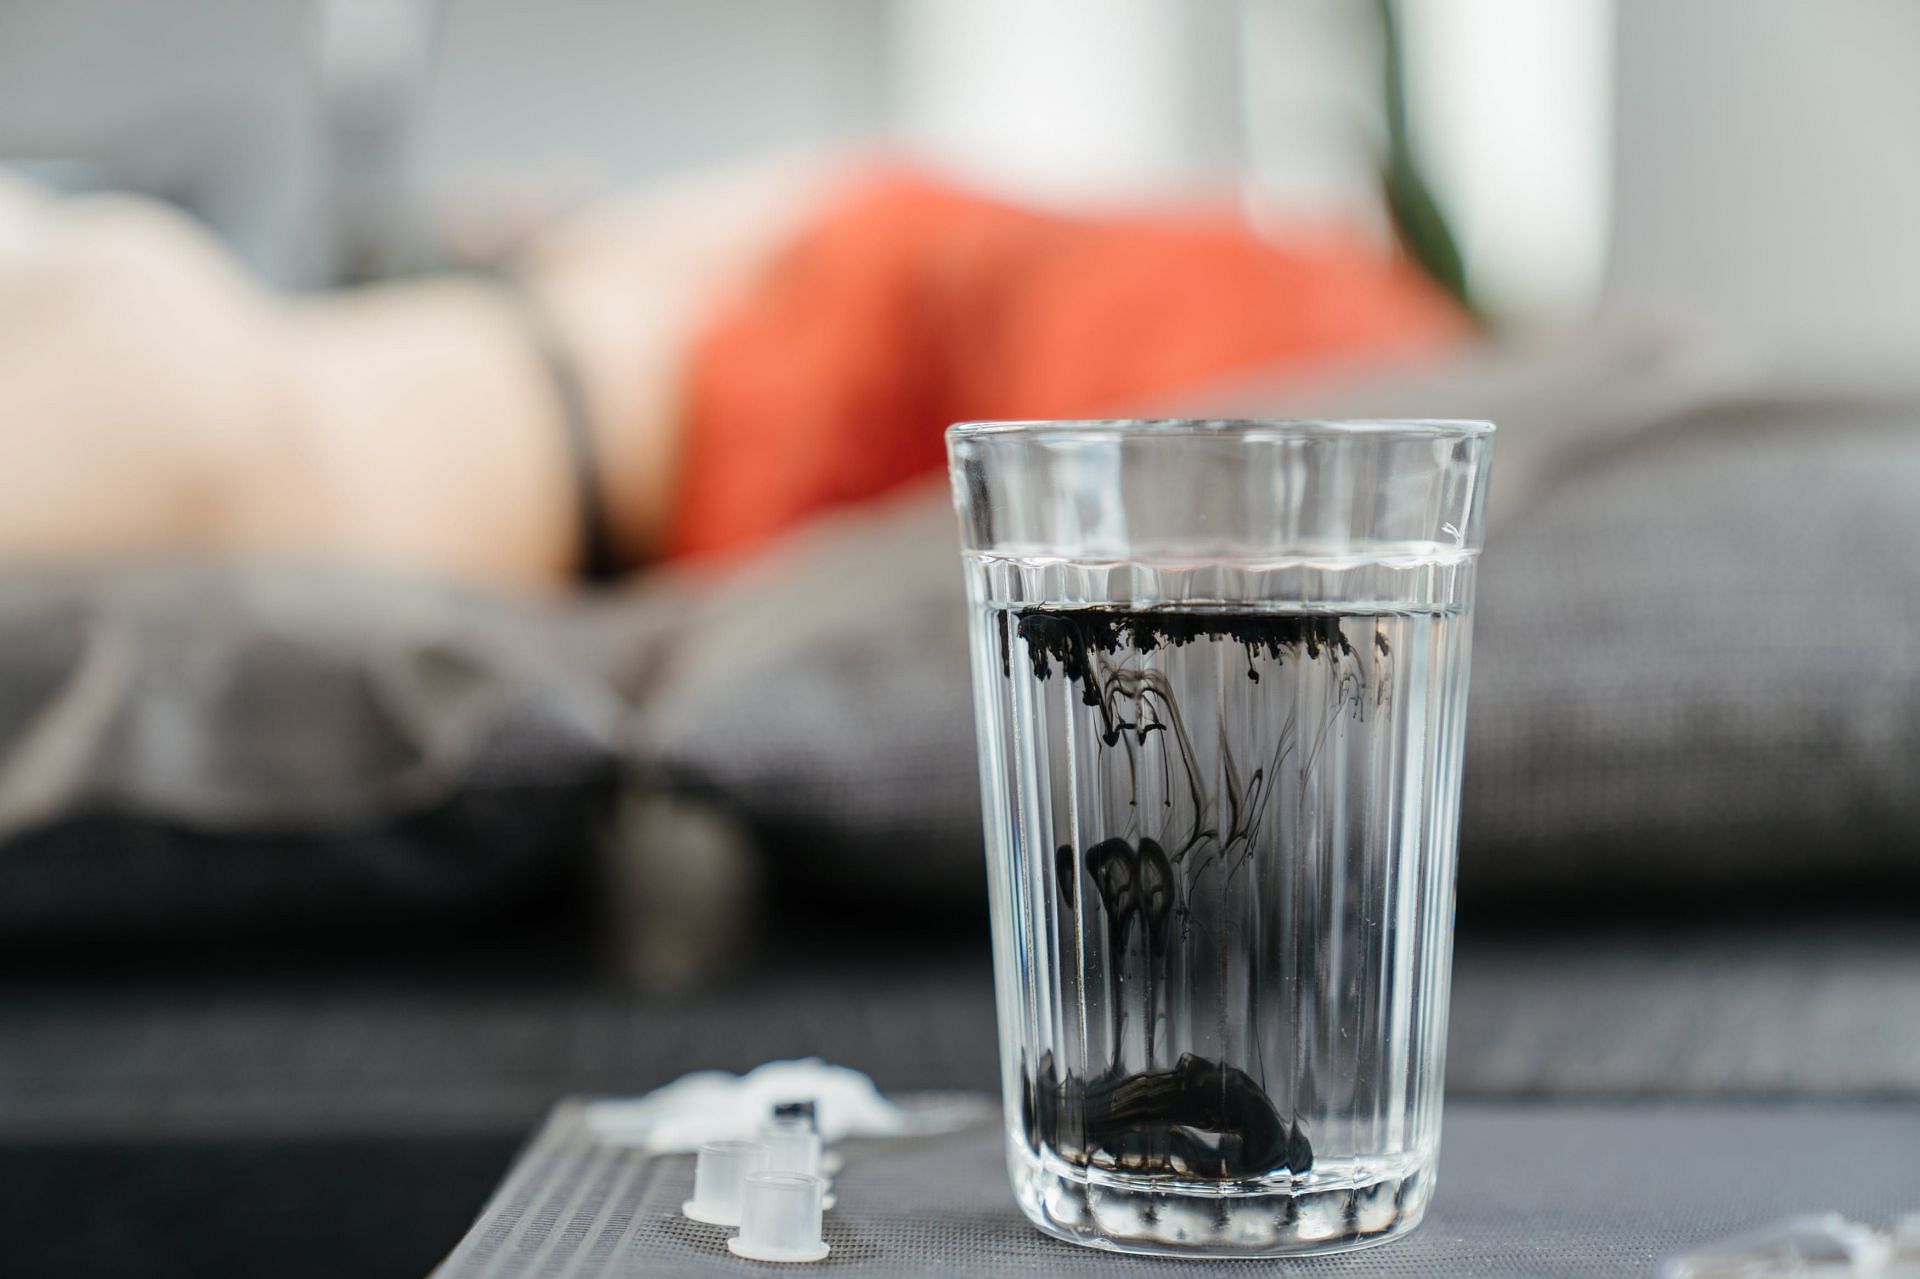 Drink water while eating disadvantages (image sourced via Pexels / Photo by Cottonbro)